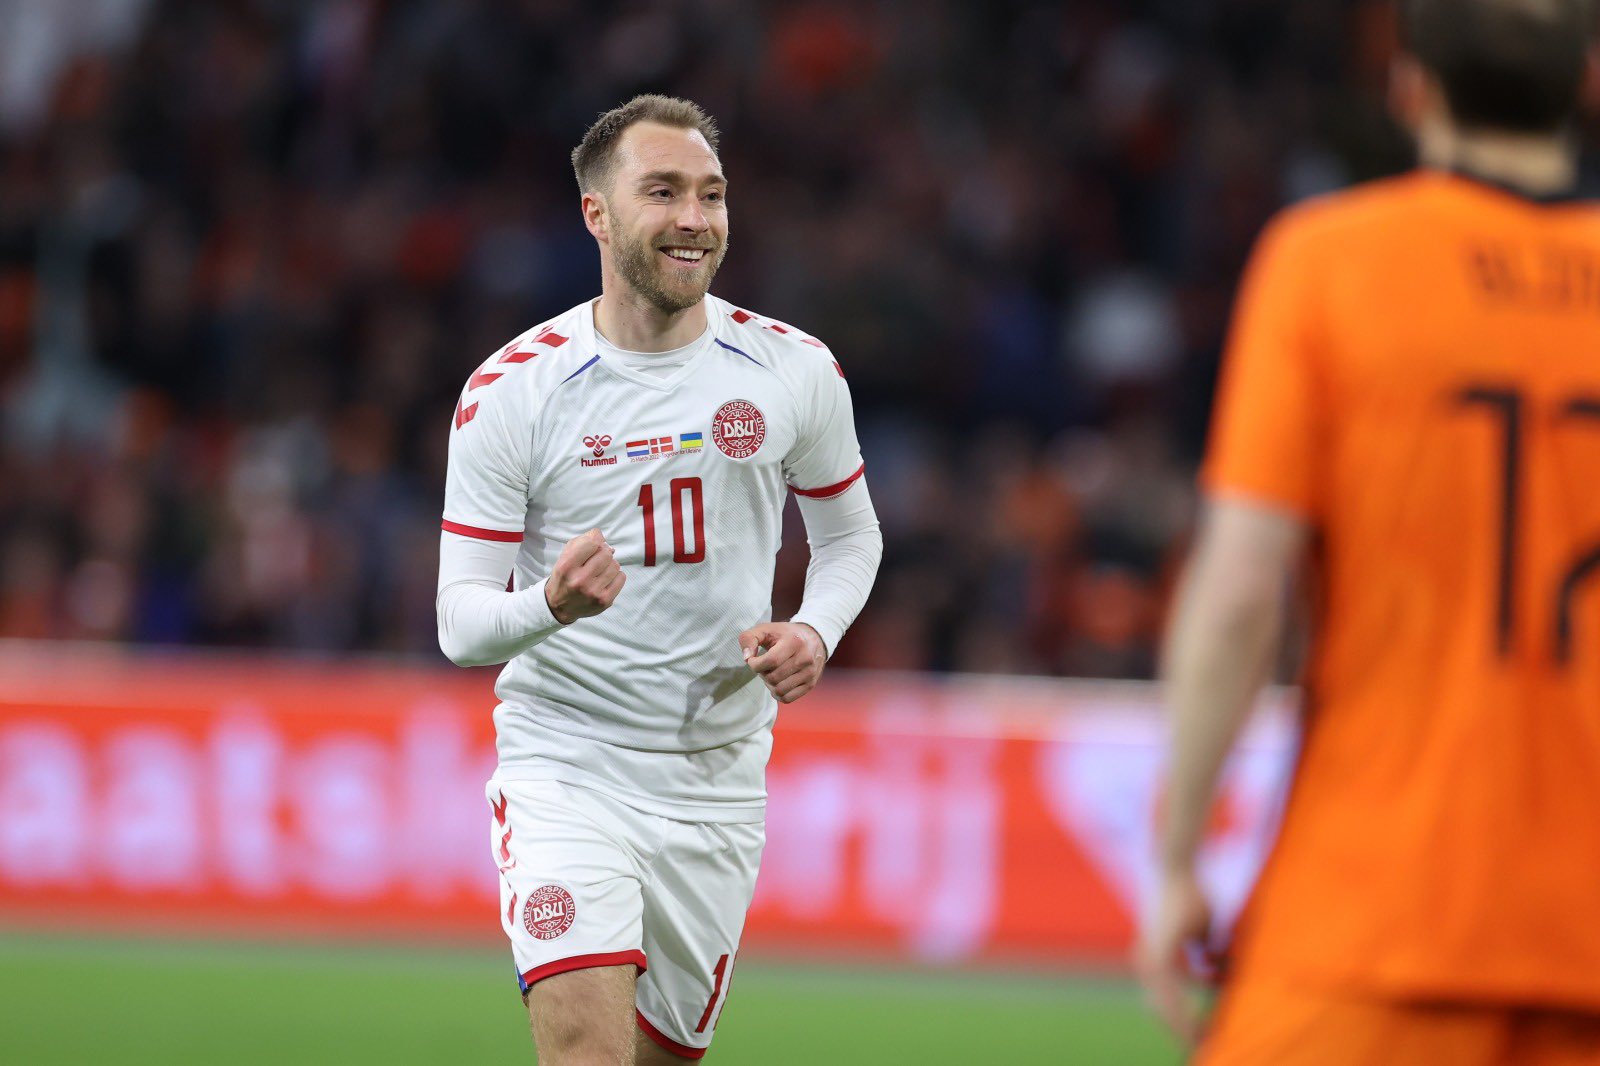 Christian Eriksen signs for Manchester United on free-transfer with contract until 2025